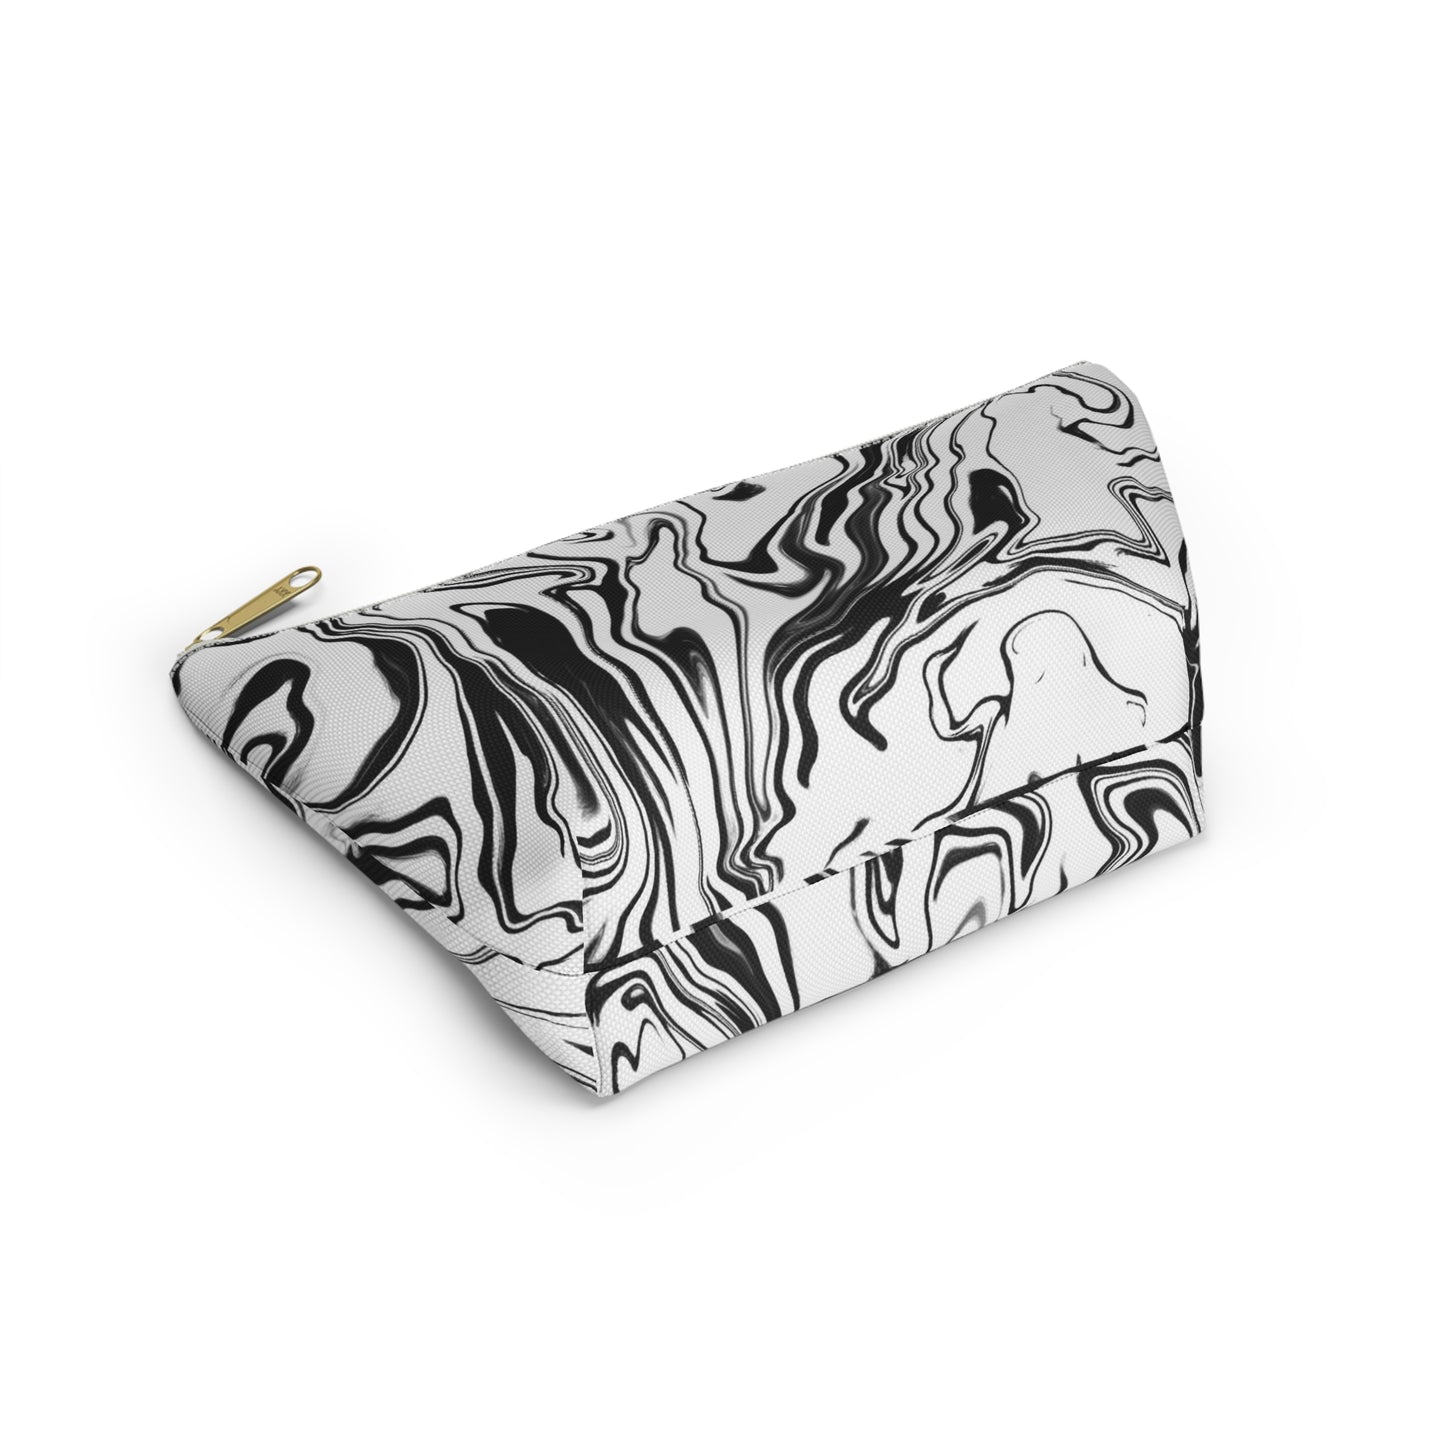 BLACK AND WHITE ABSTRACT SWIRL